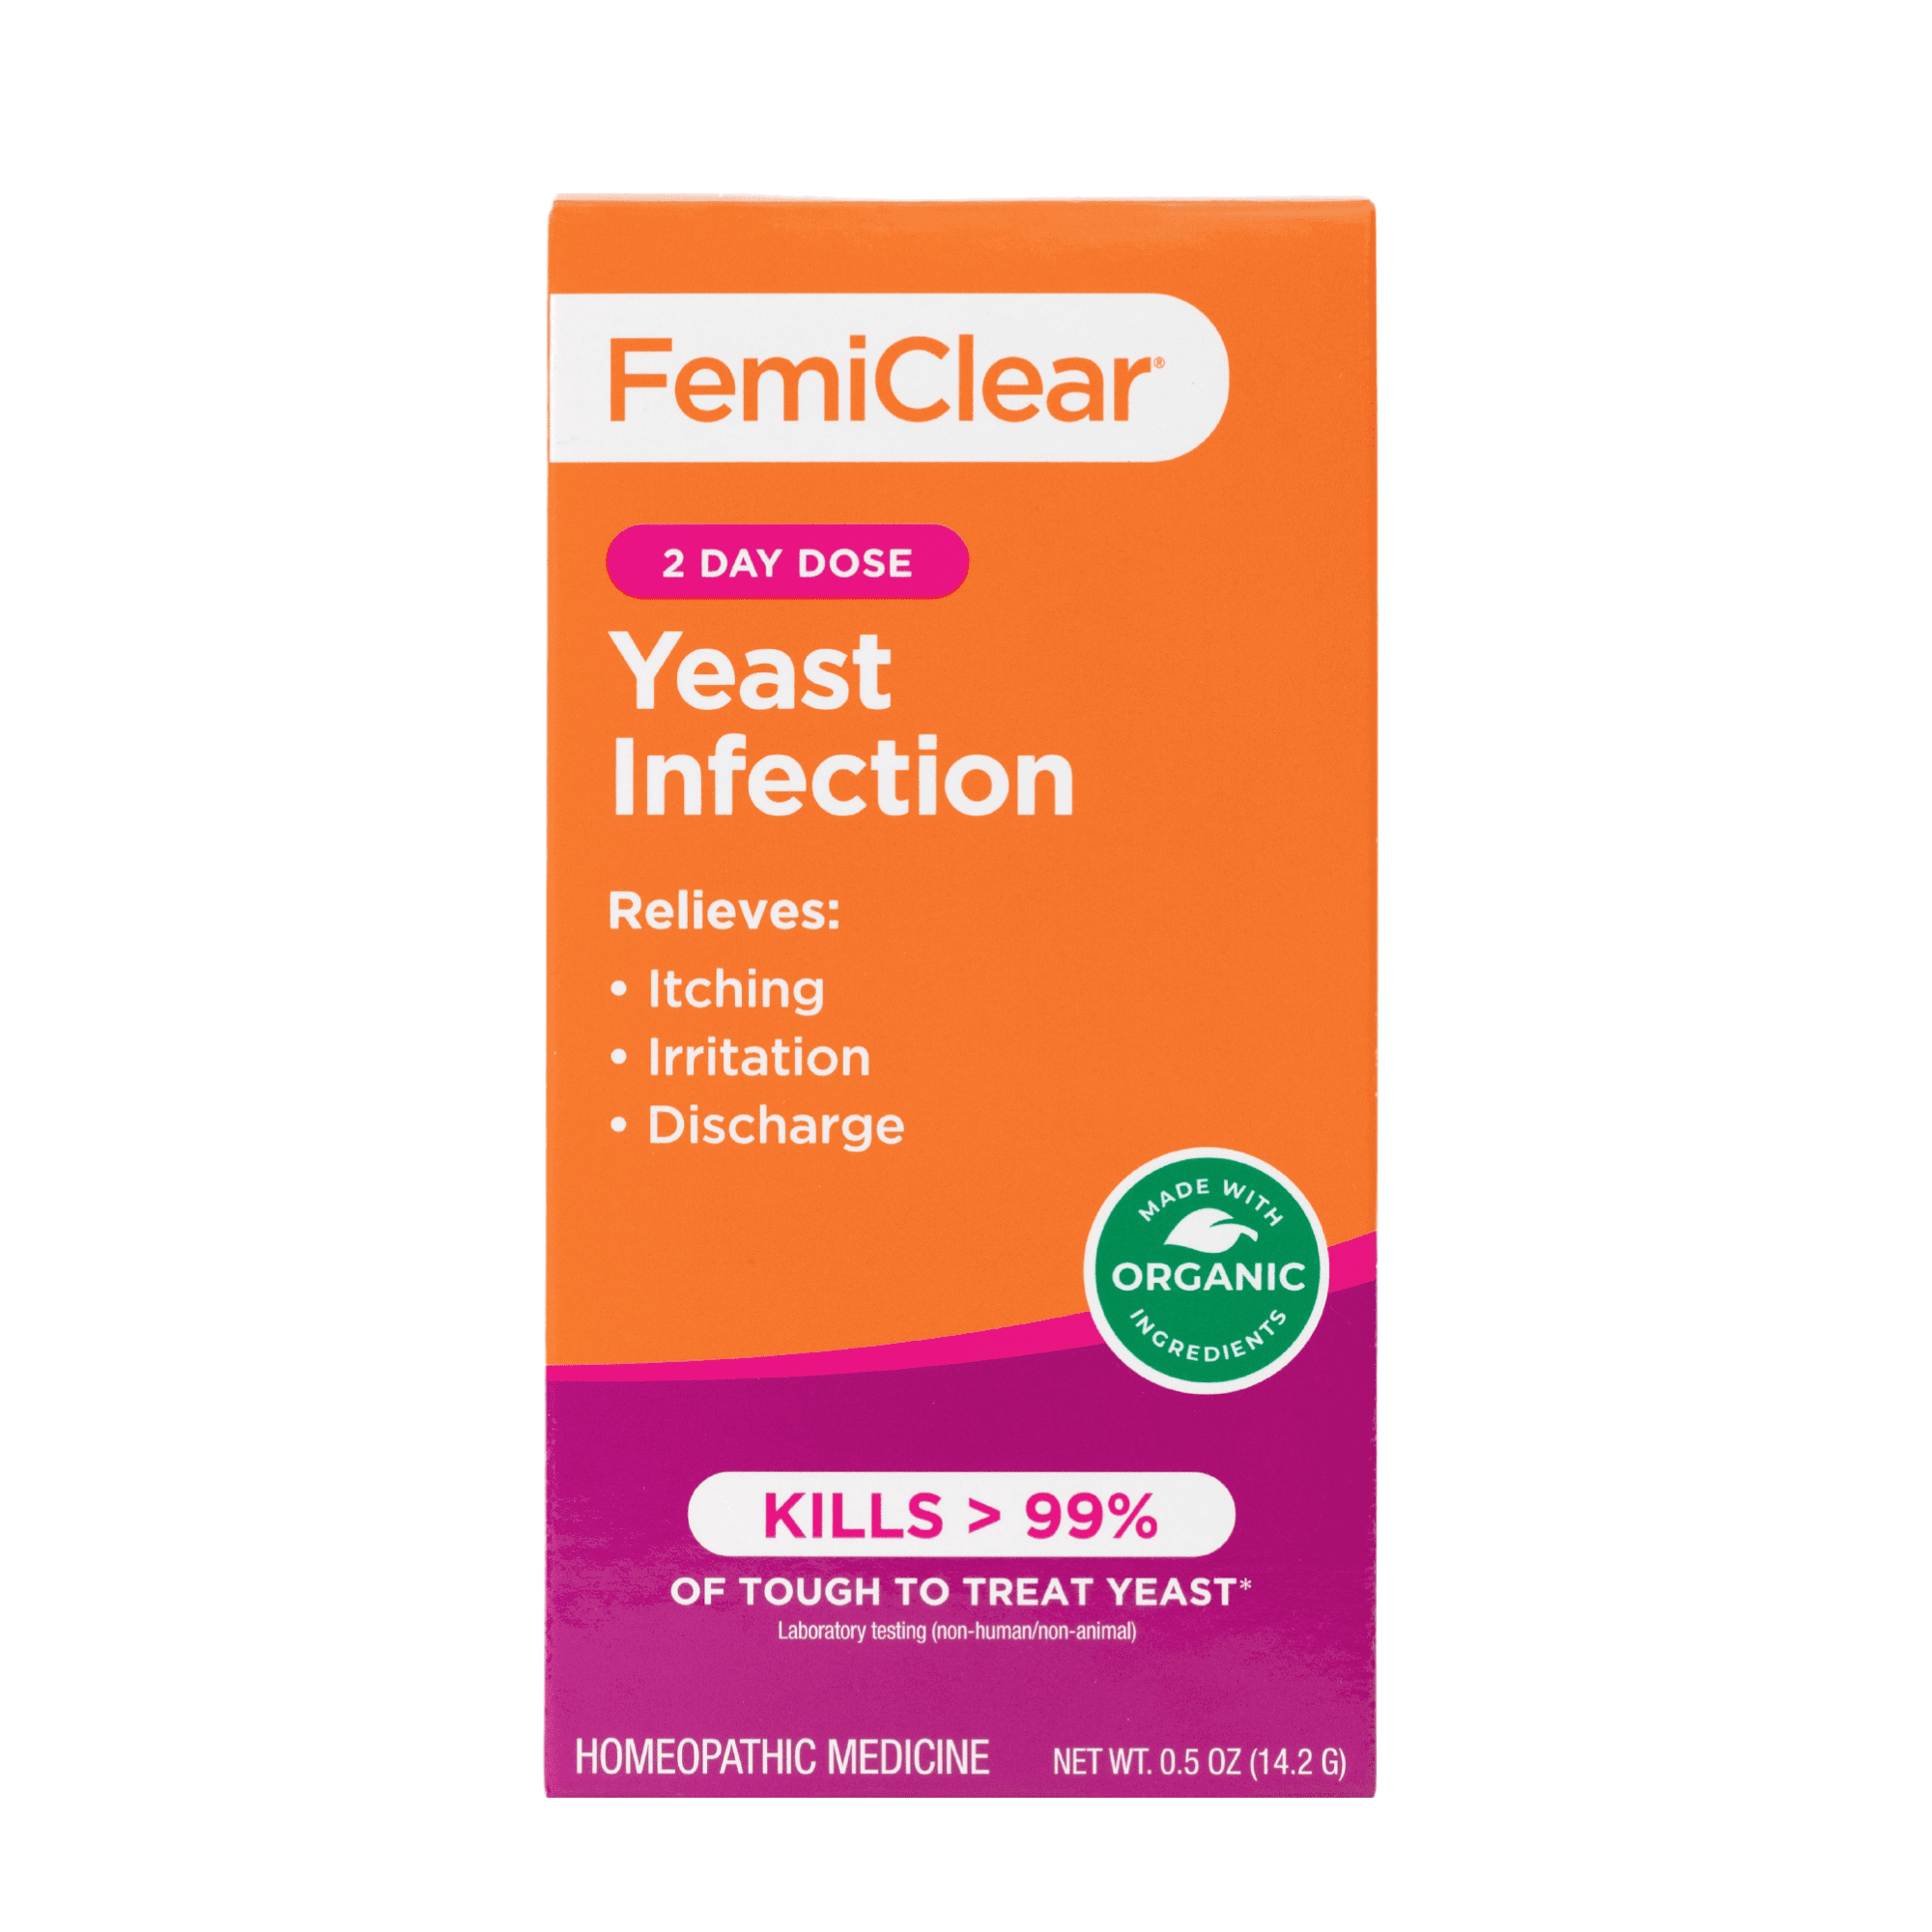 How to Fix a Yeast Infection - Yeast Infection Treatments